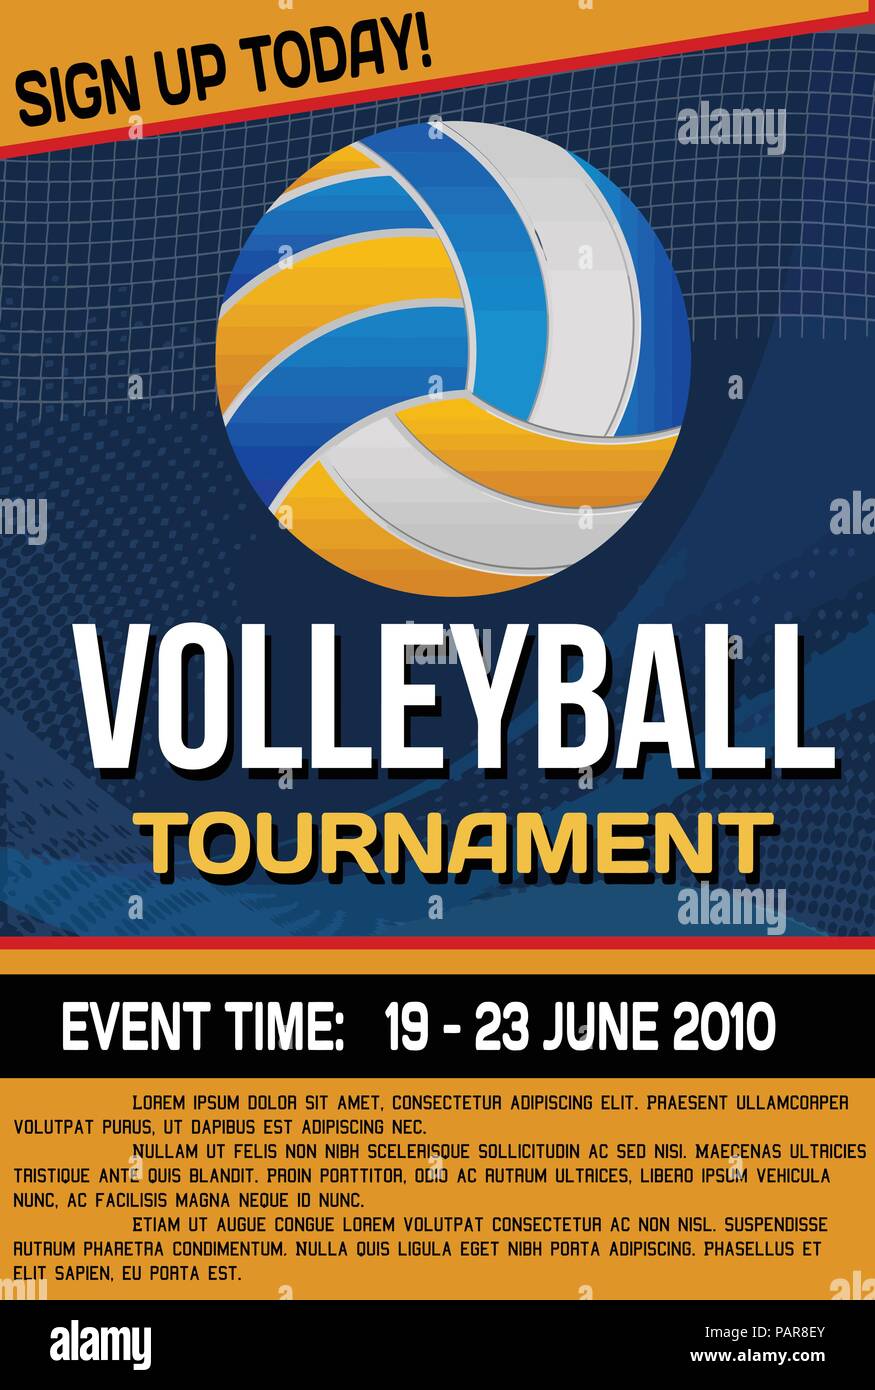 Details 100 volleyball poster background - Abzlocal.mx